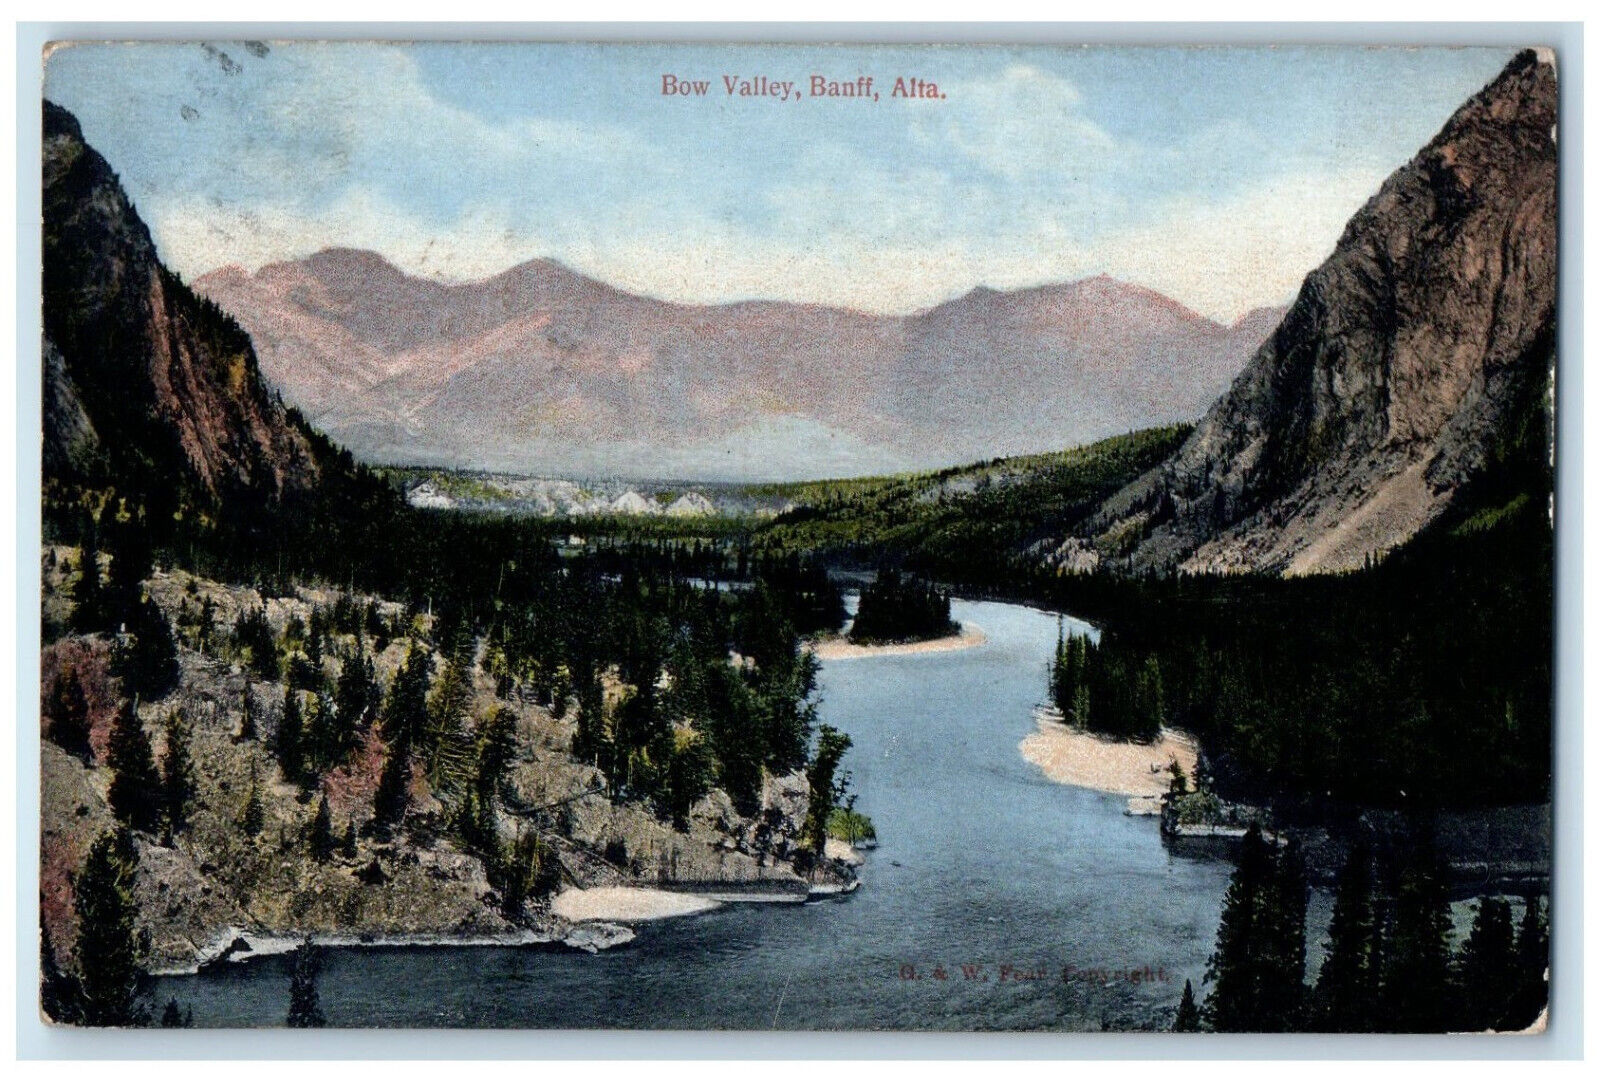 1911 View of Bow Valley Banff Alberta Canada Antique Posted Postcard